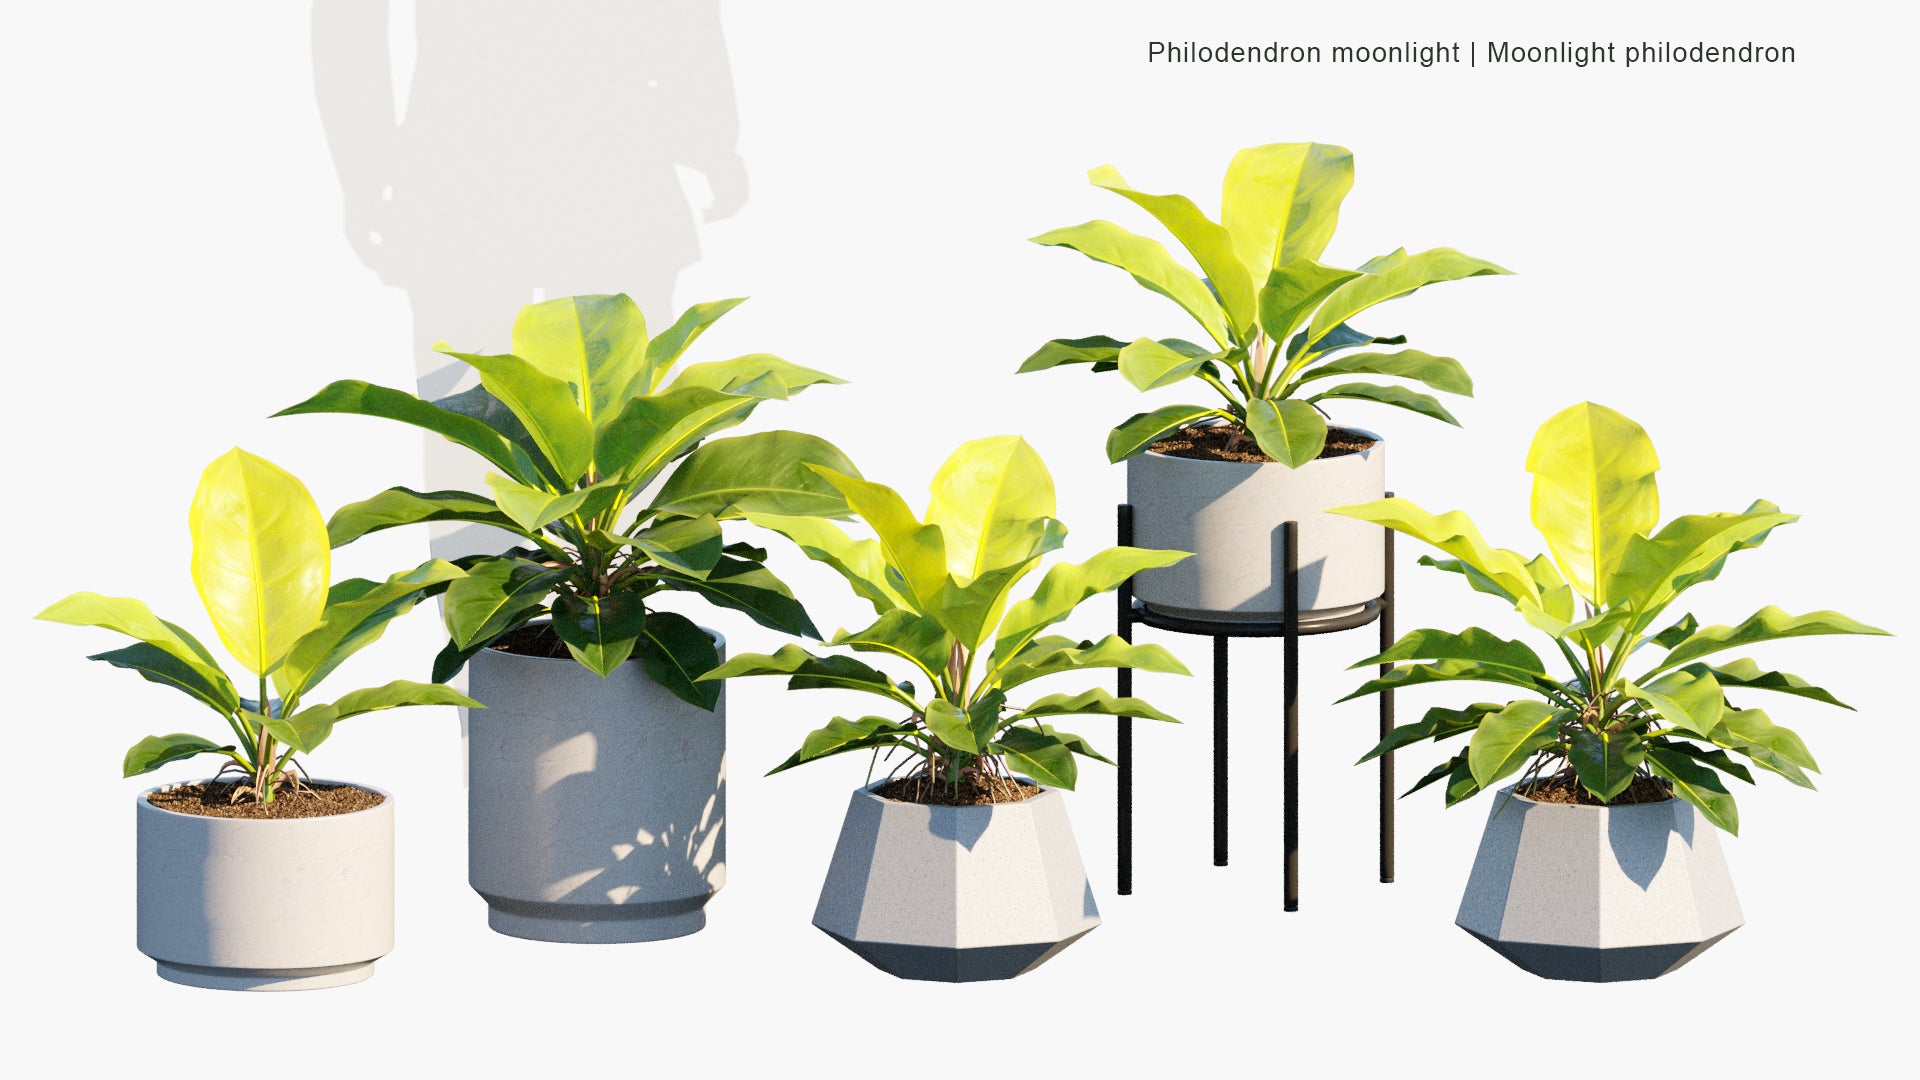 Low Poly Philodendron Moonlight - Moonlight Philodendron (3D Model)